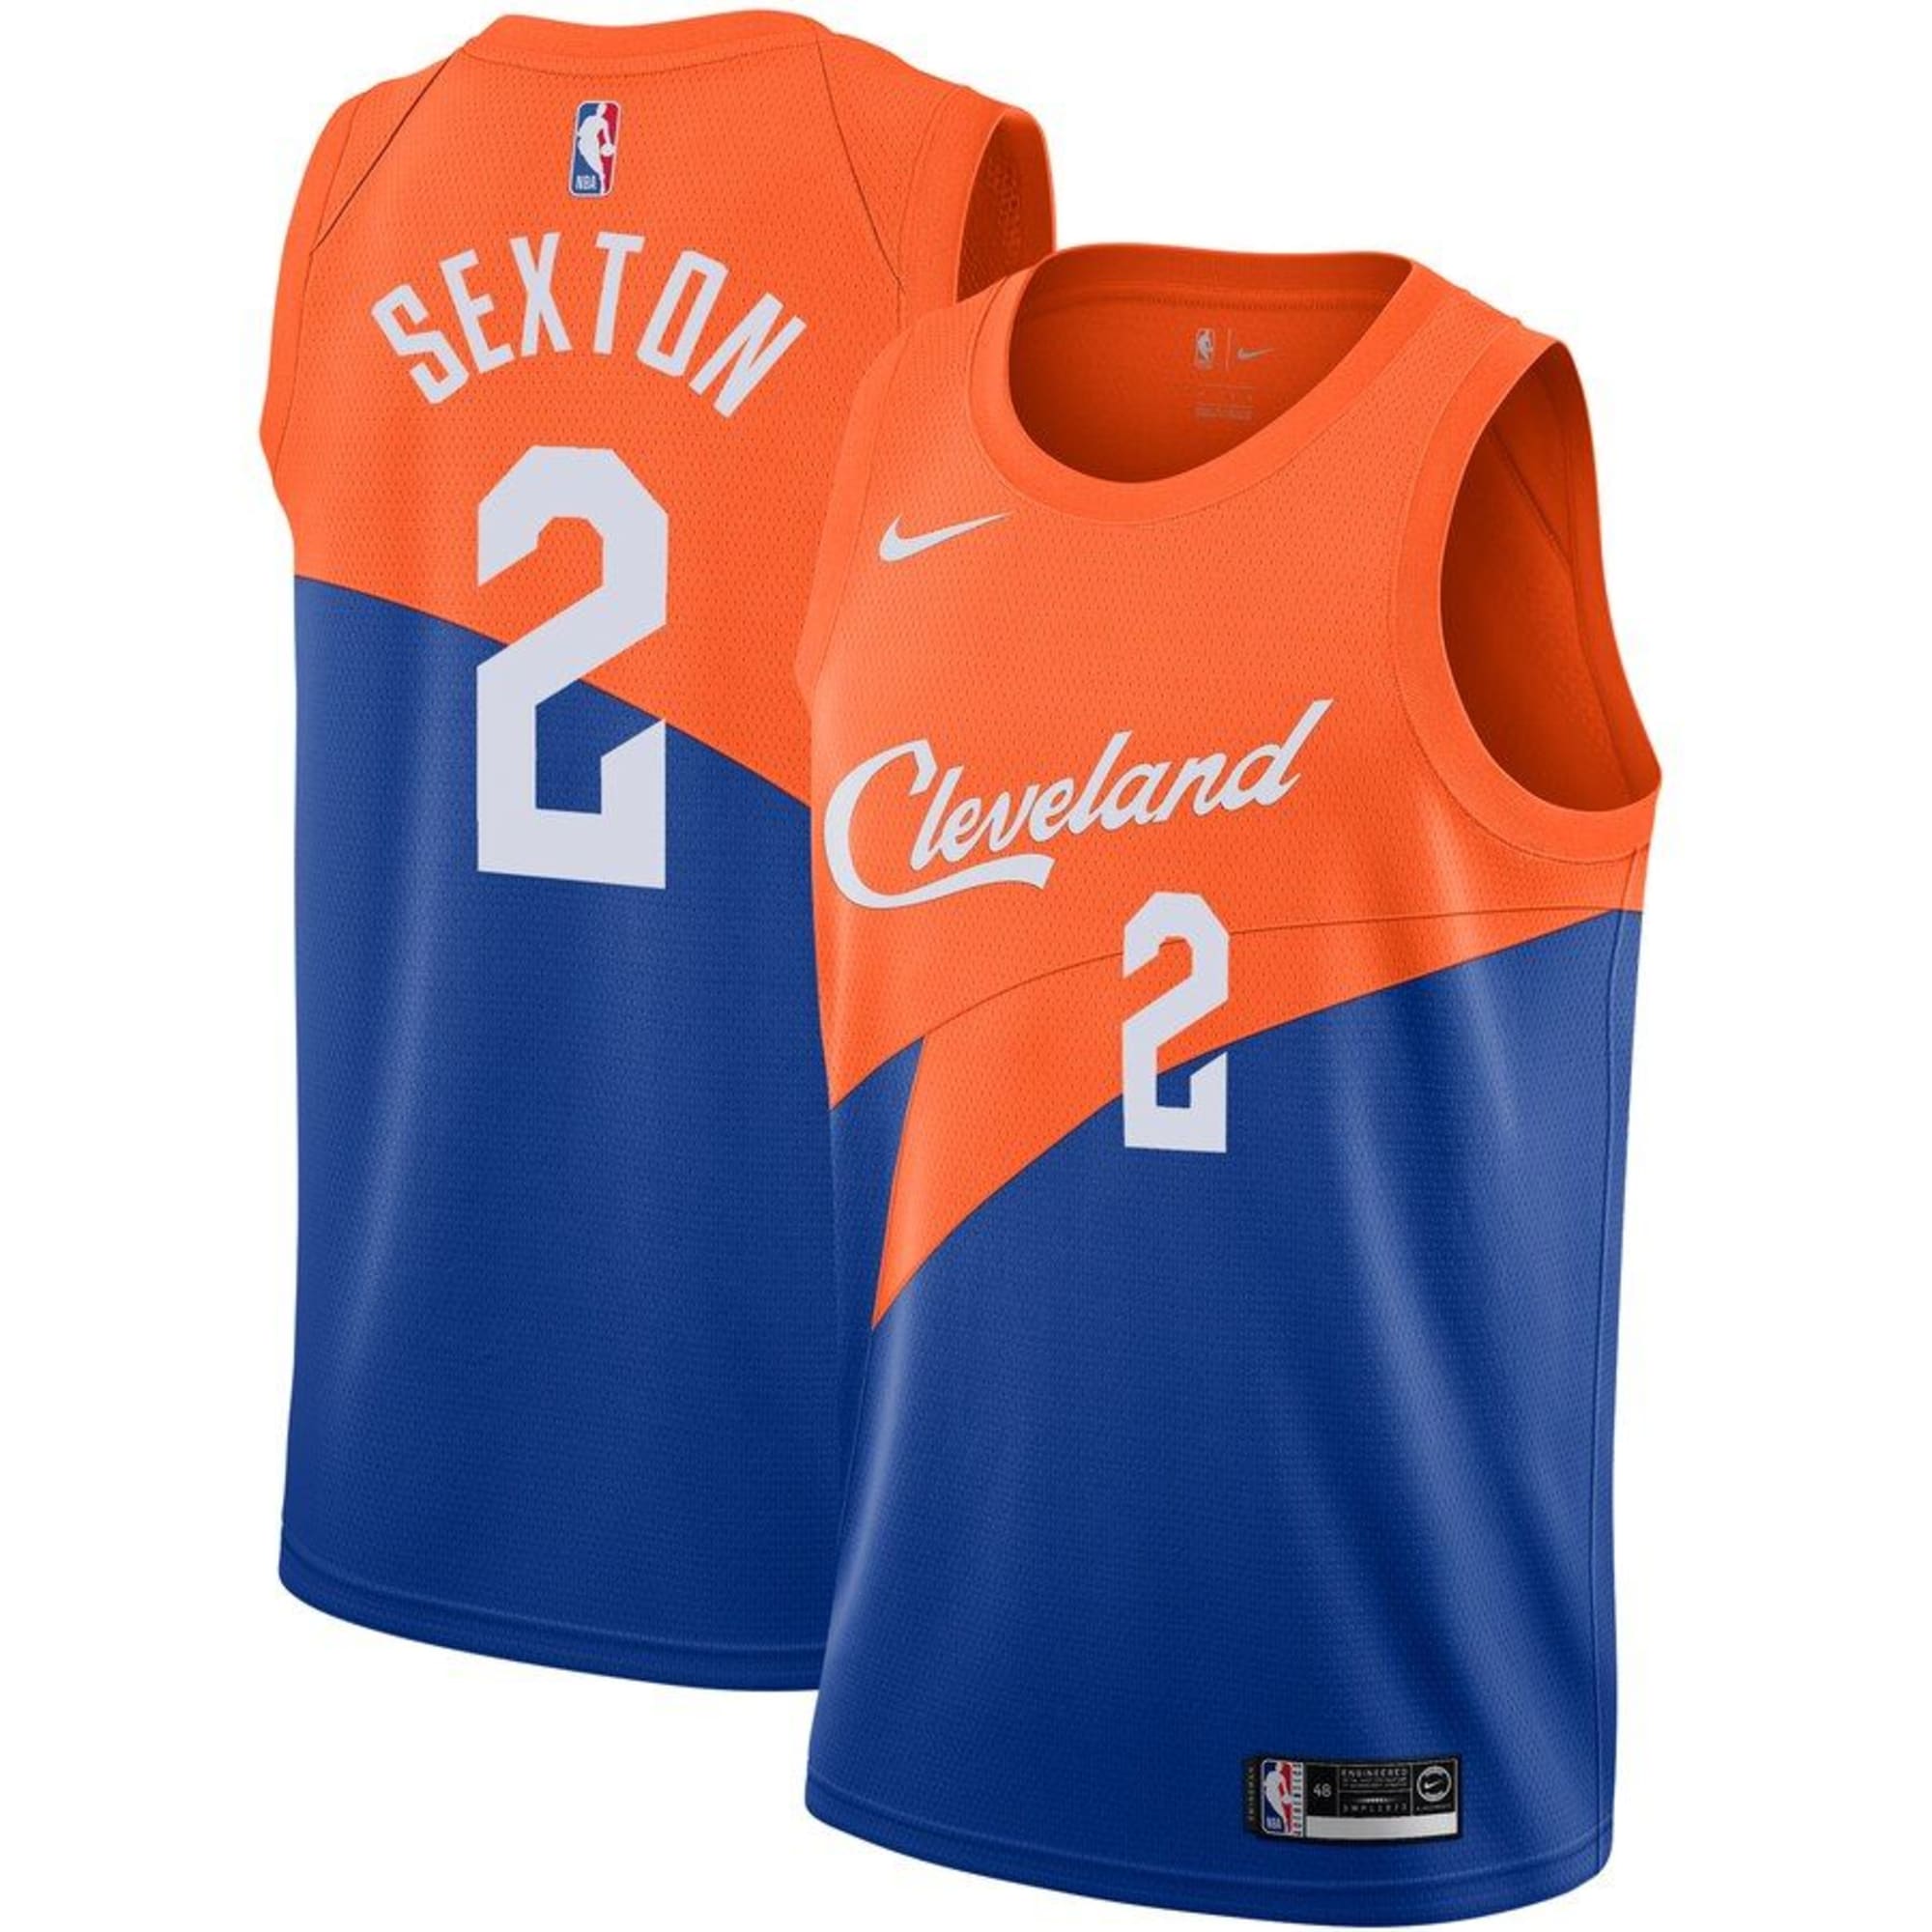 cleveland practice jersey